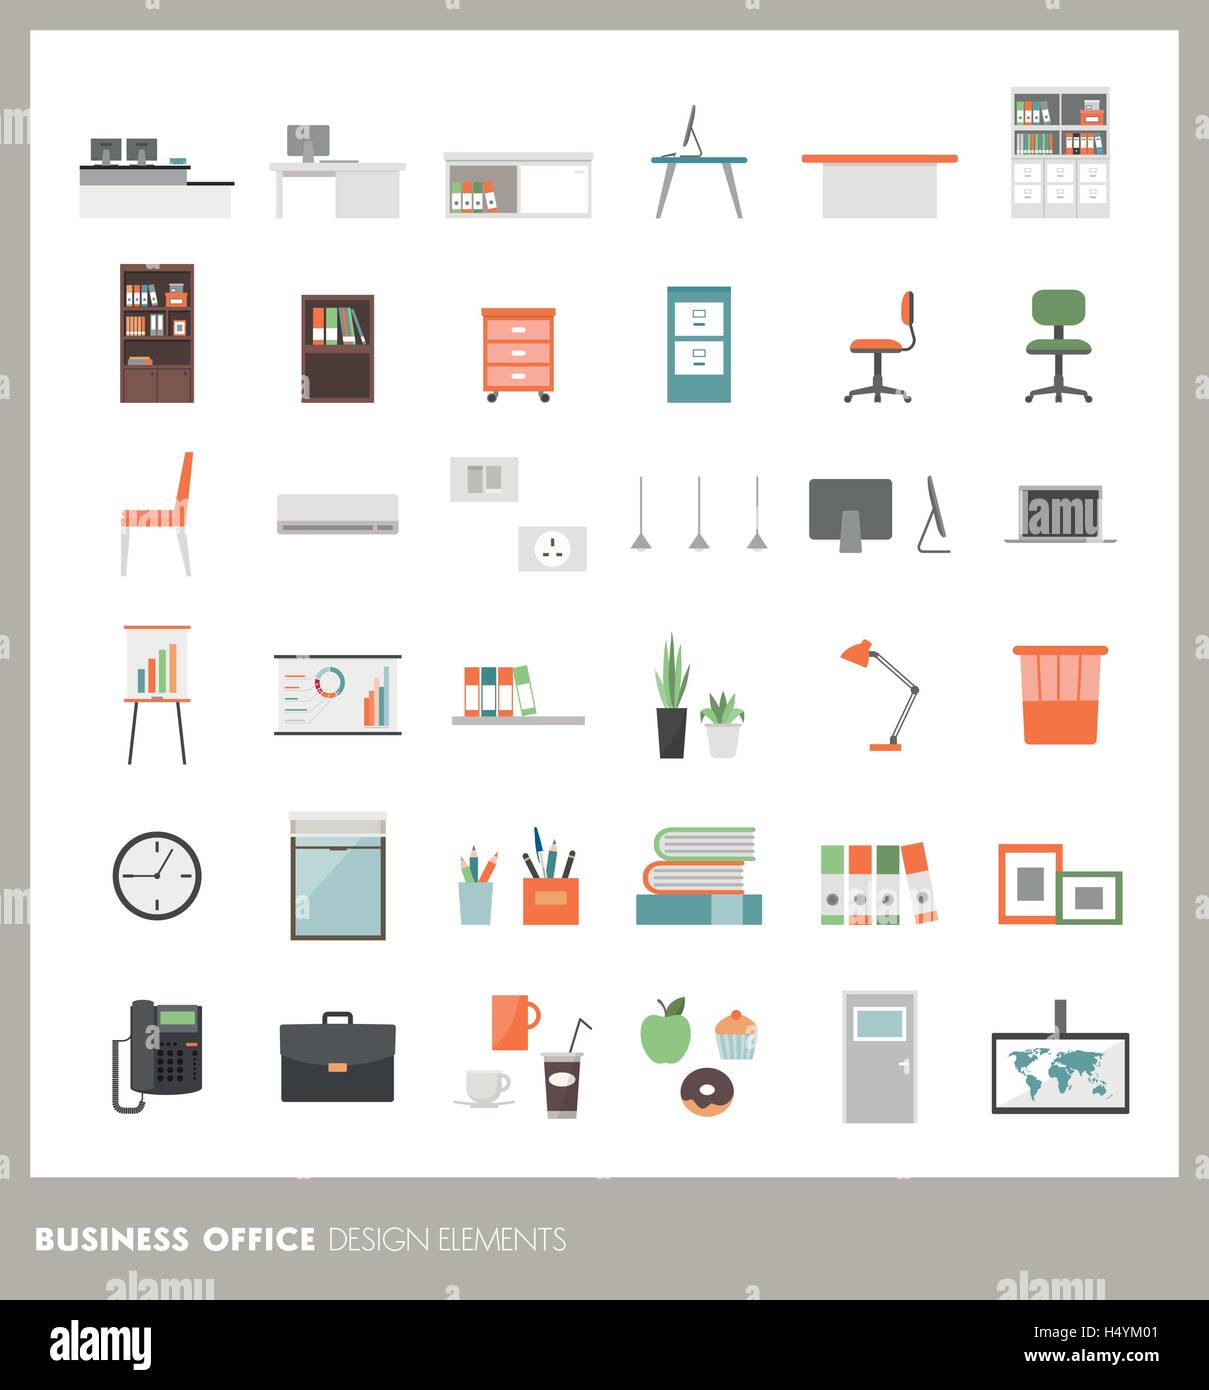 Business office icons set: objects, furnishings, decorations and electronics Stock Vector